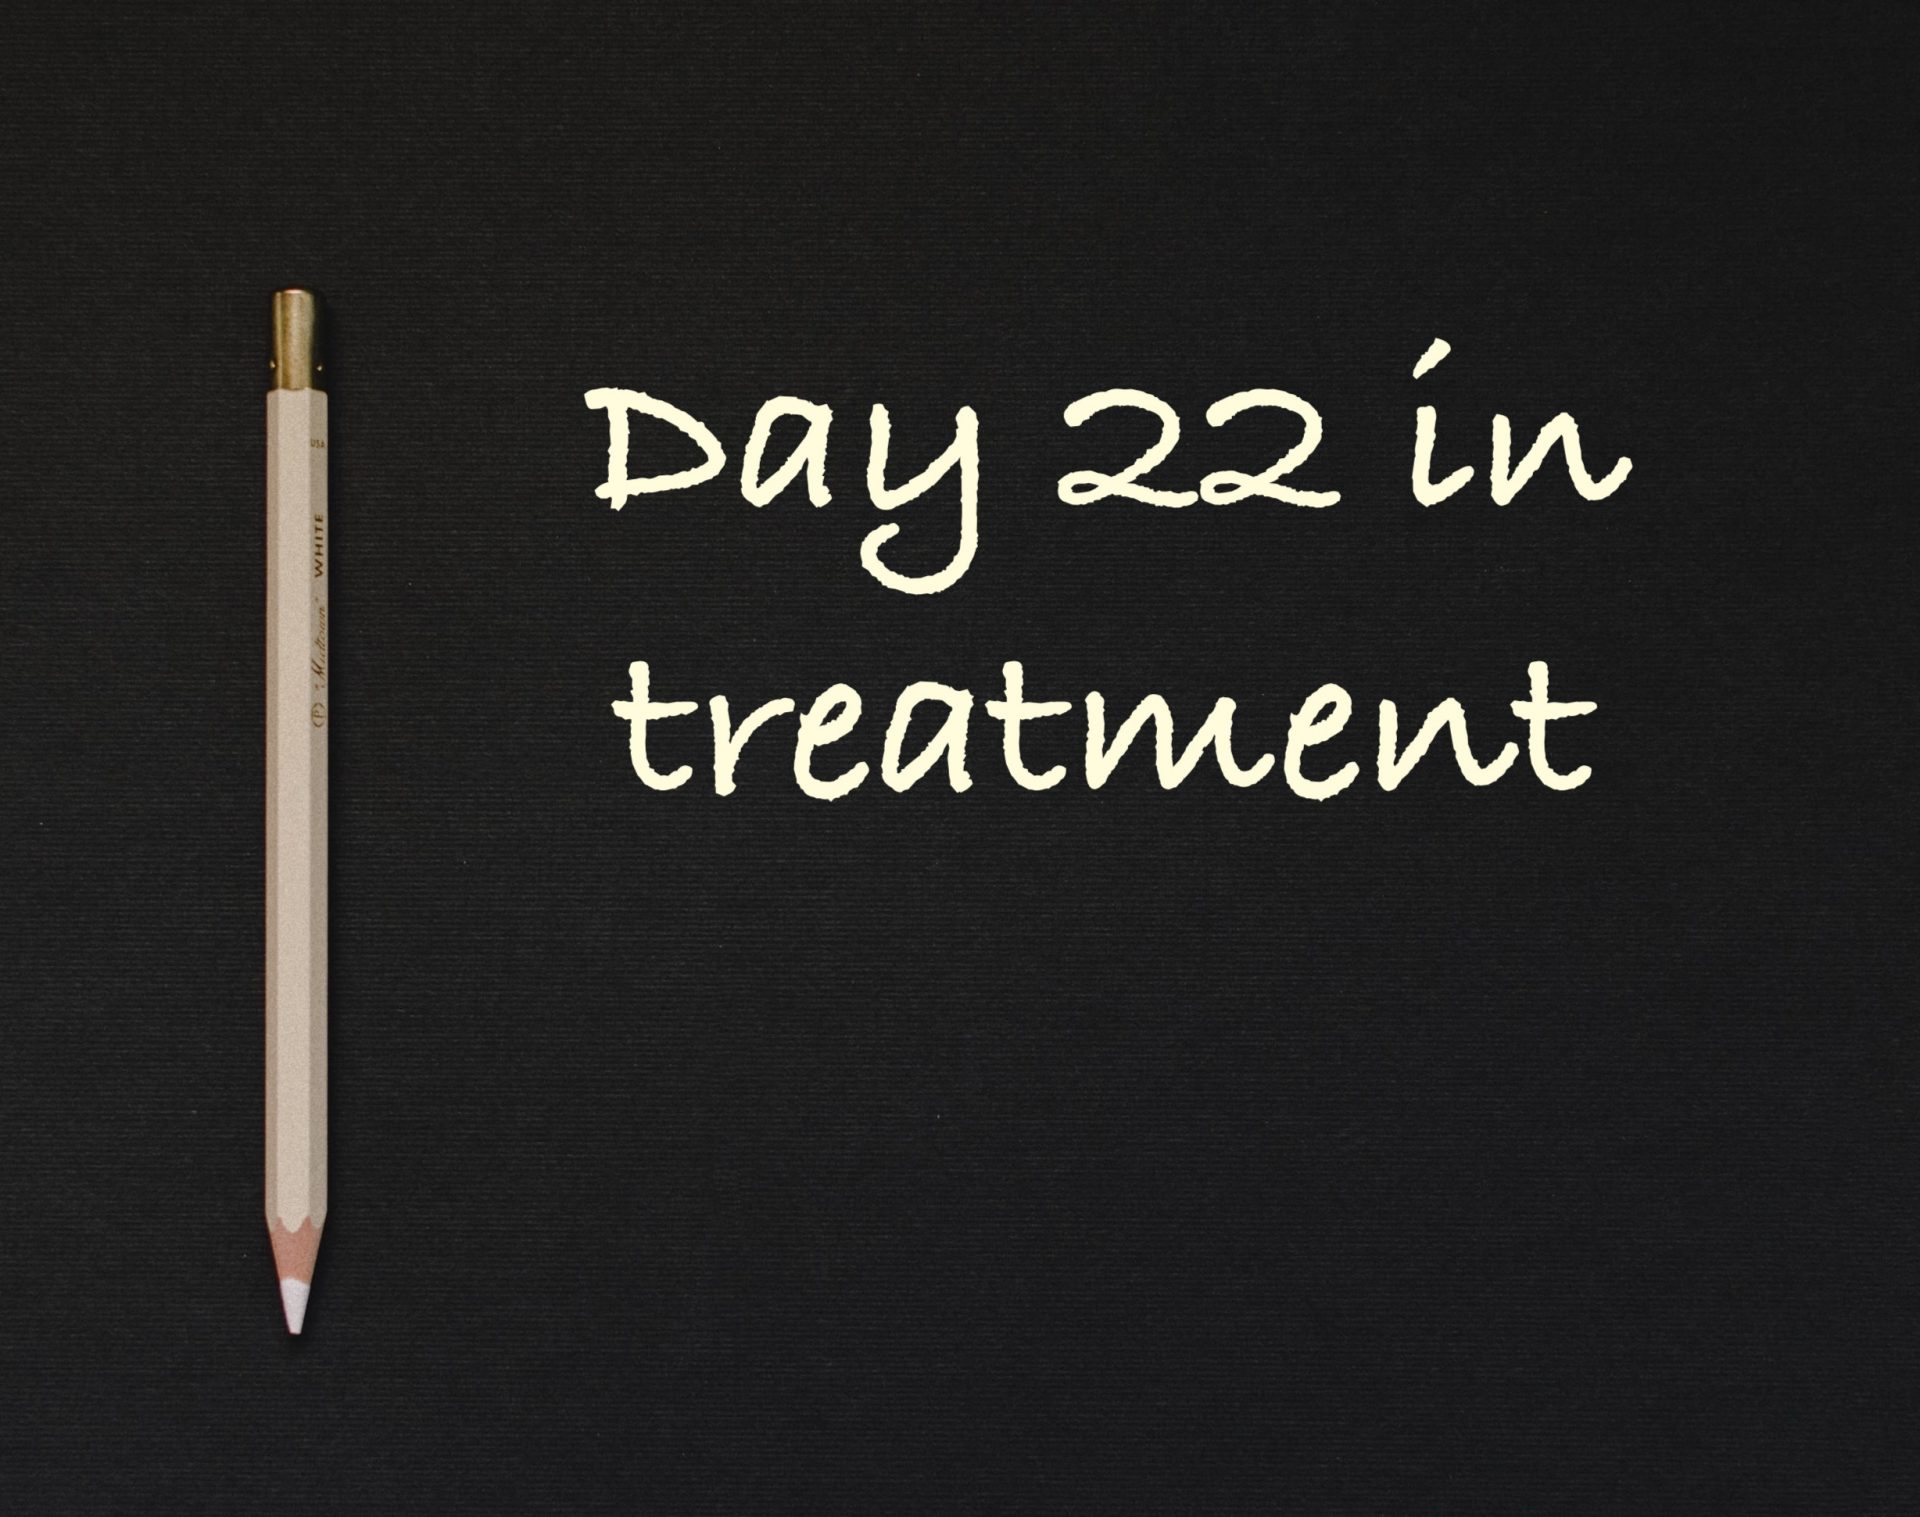 Day 22 in treatment